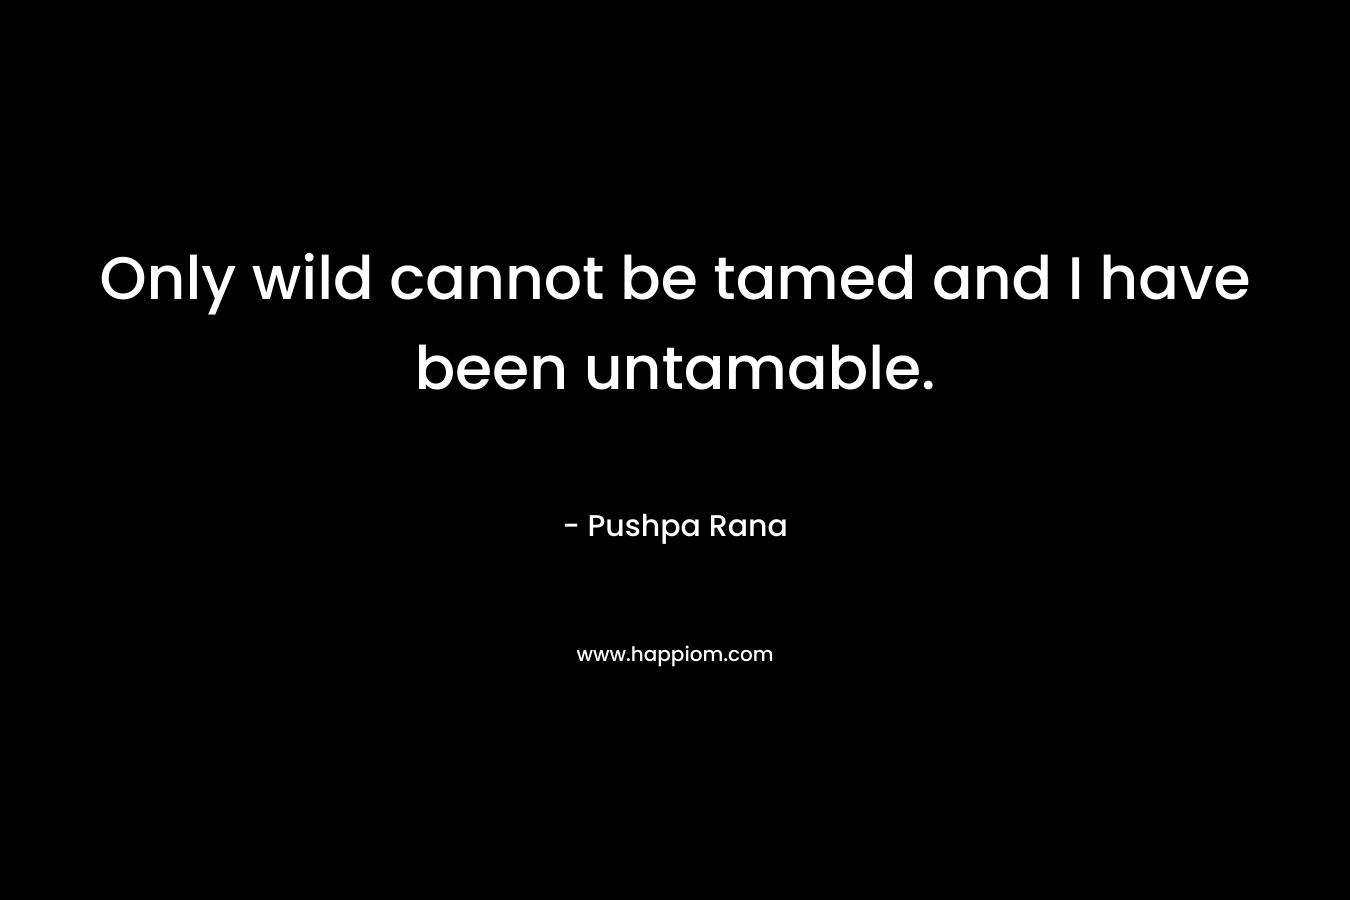 Only wild cannot be tamed and I have been untamable. – Pushpa Rana